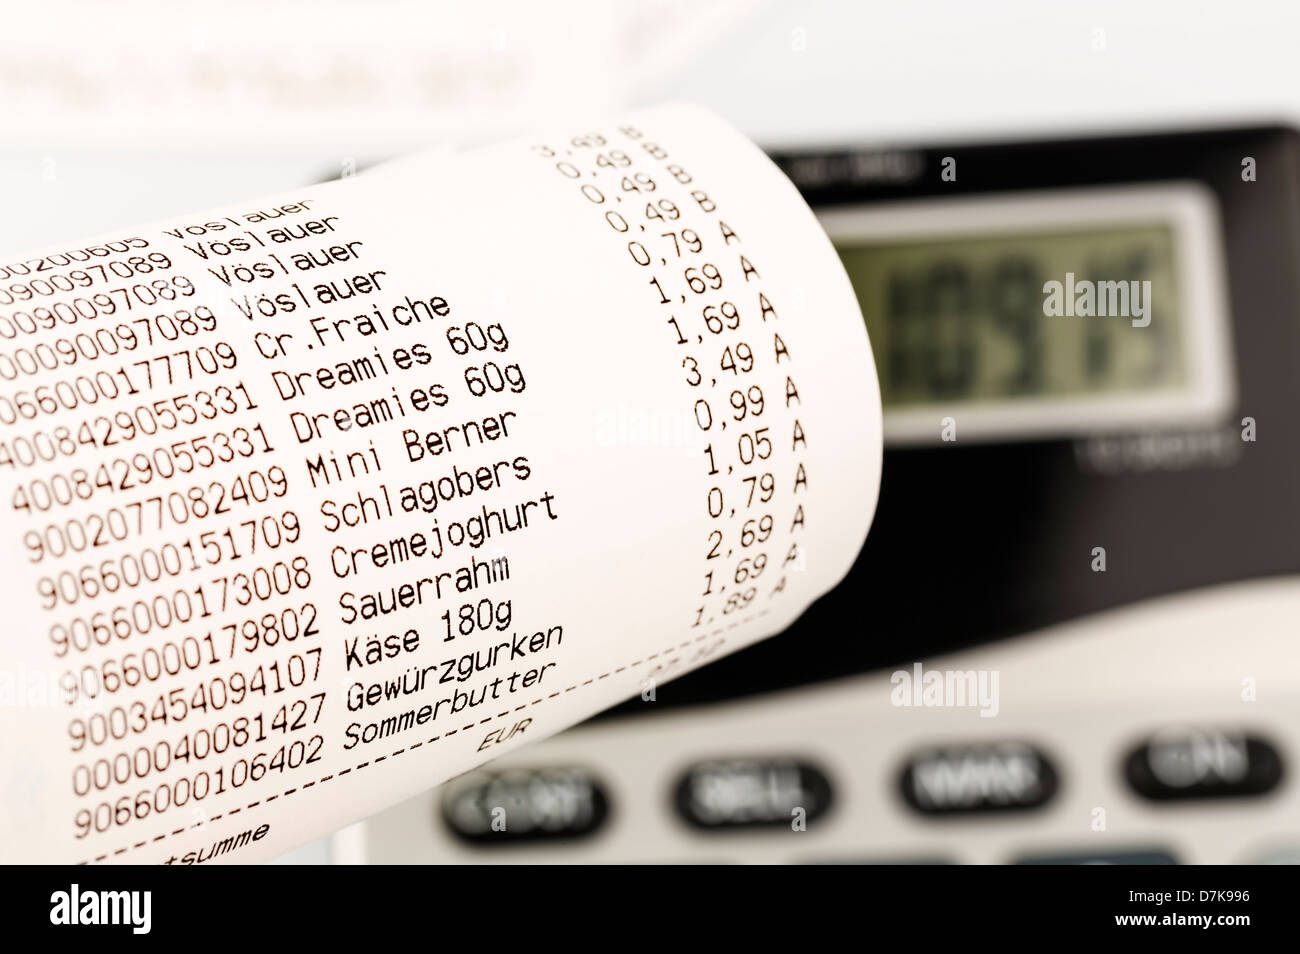 Shopping receipt for groceries with calculator, close up Stock Photo